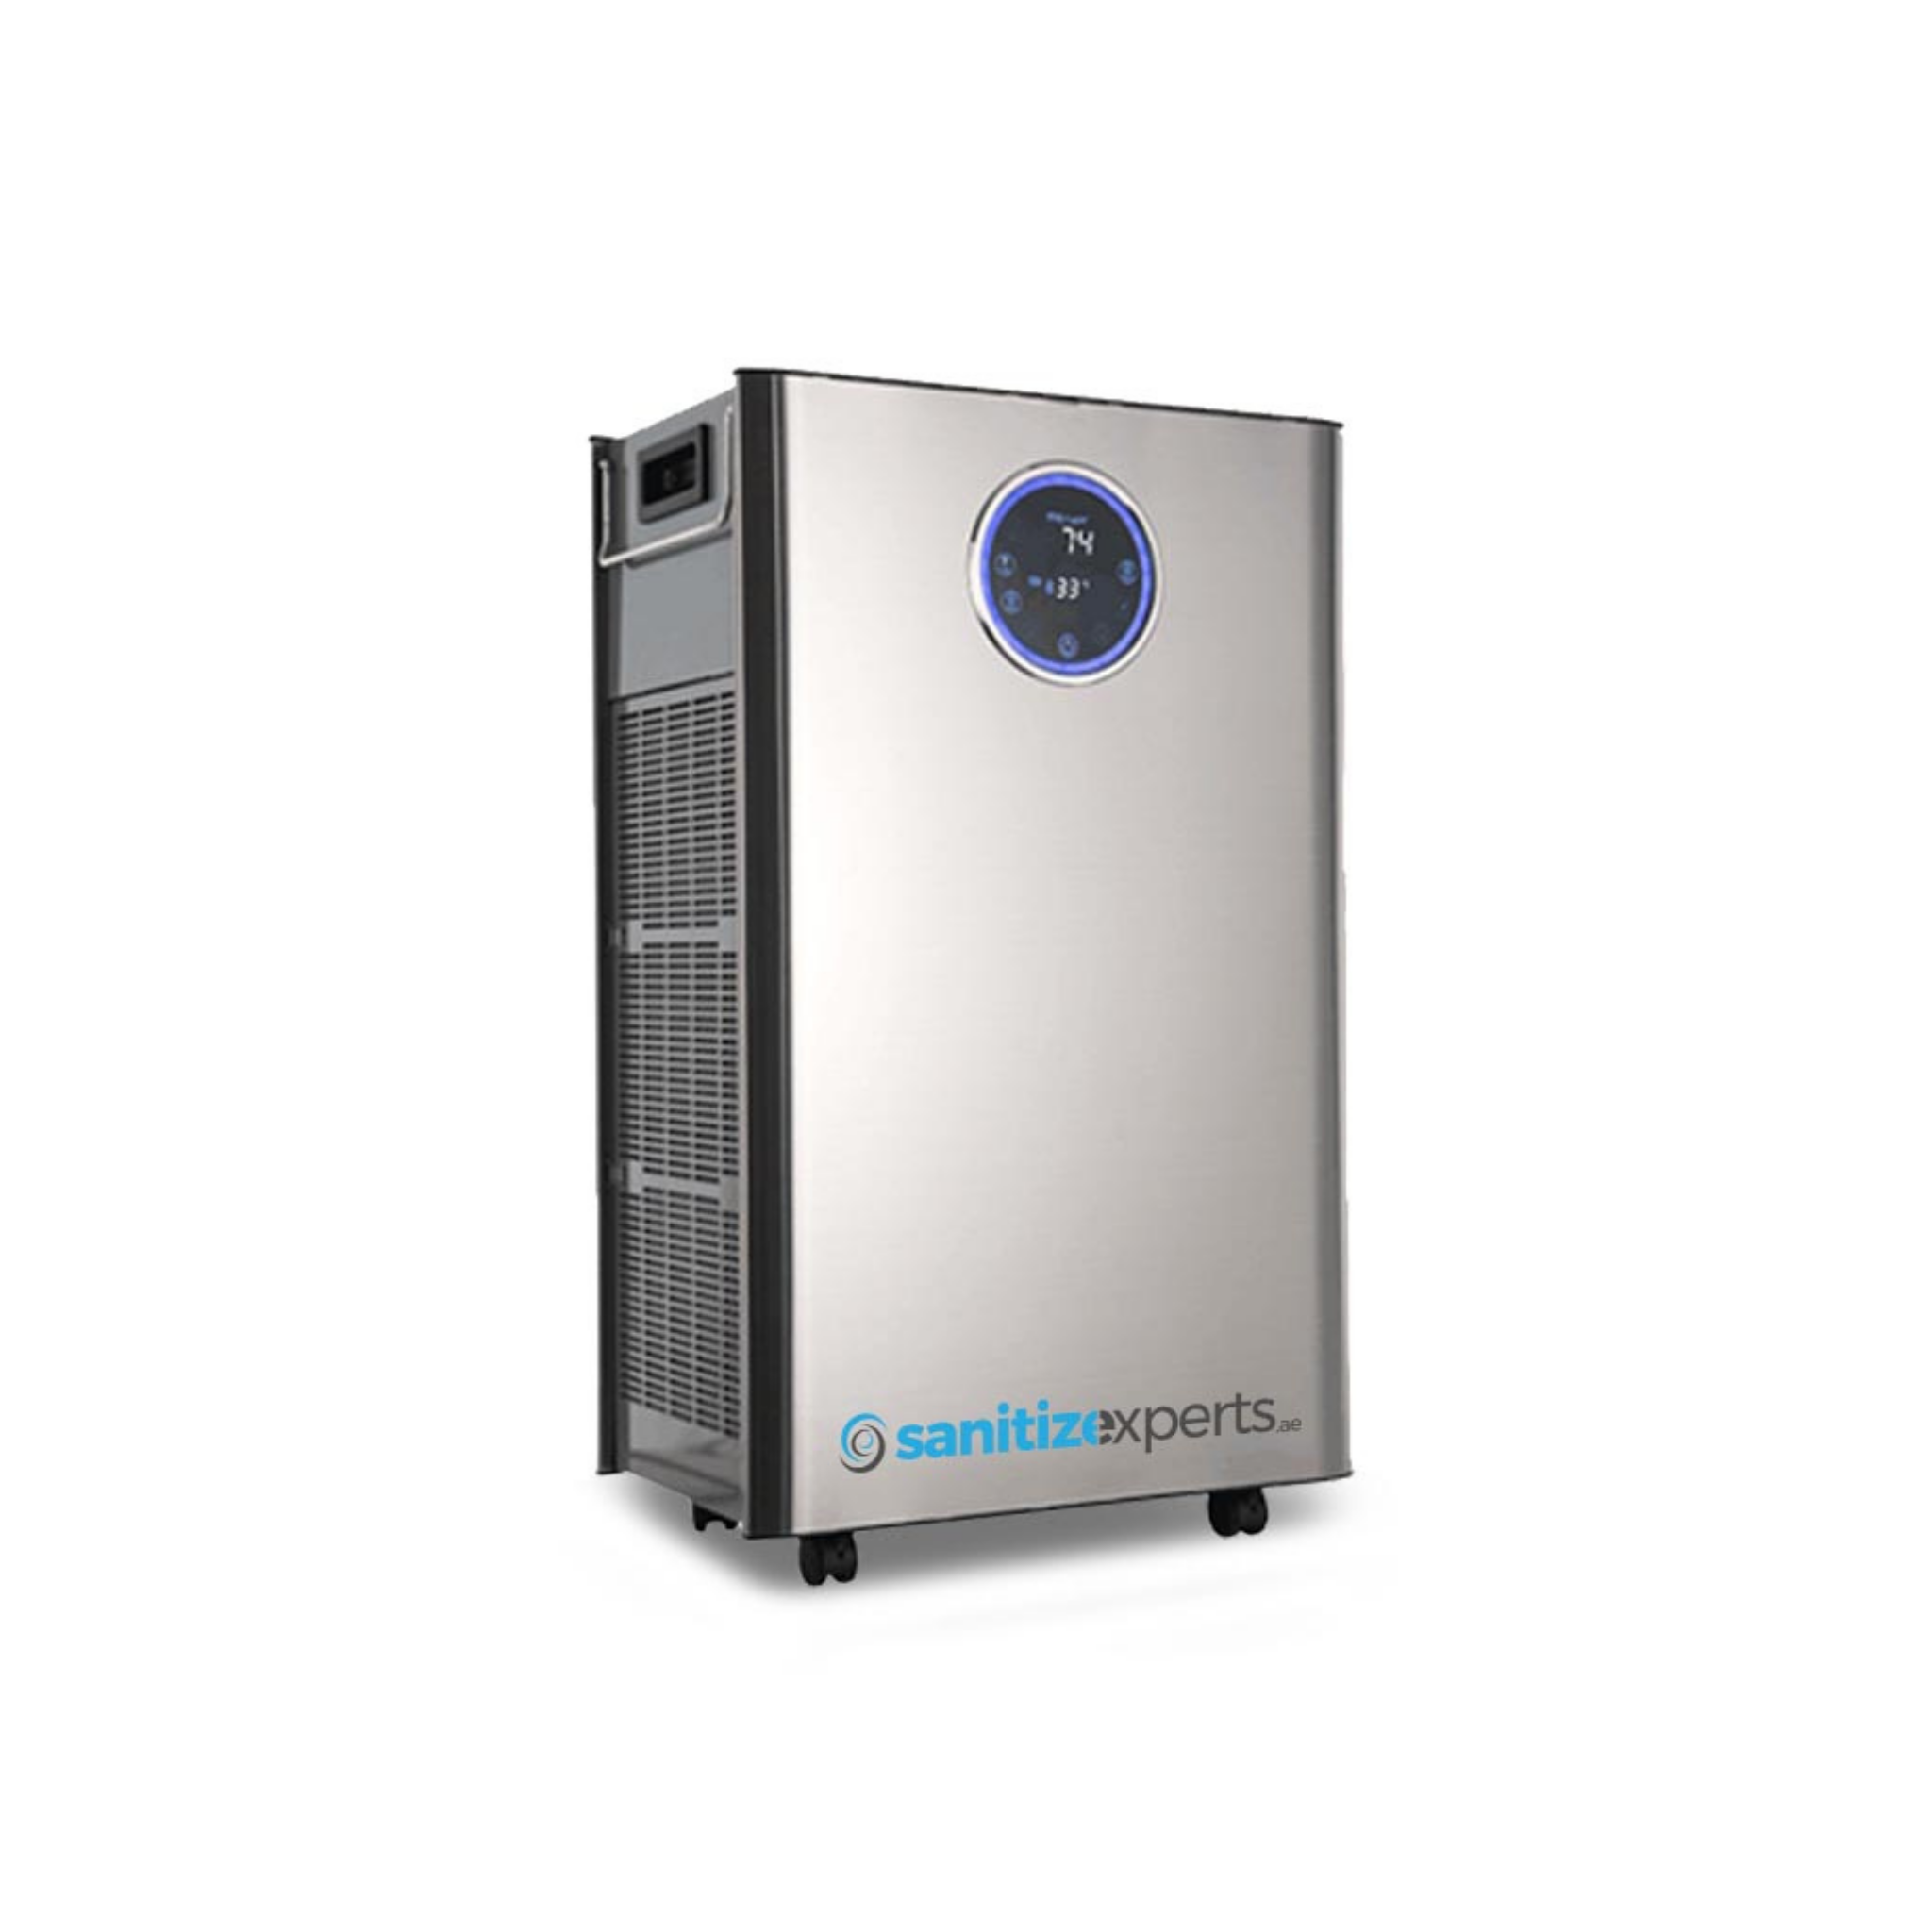 Sanitizexperts Air Purifier - Industrial Use